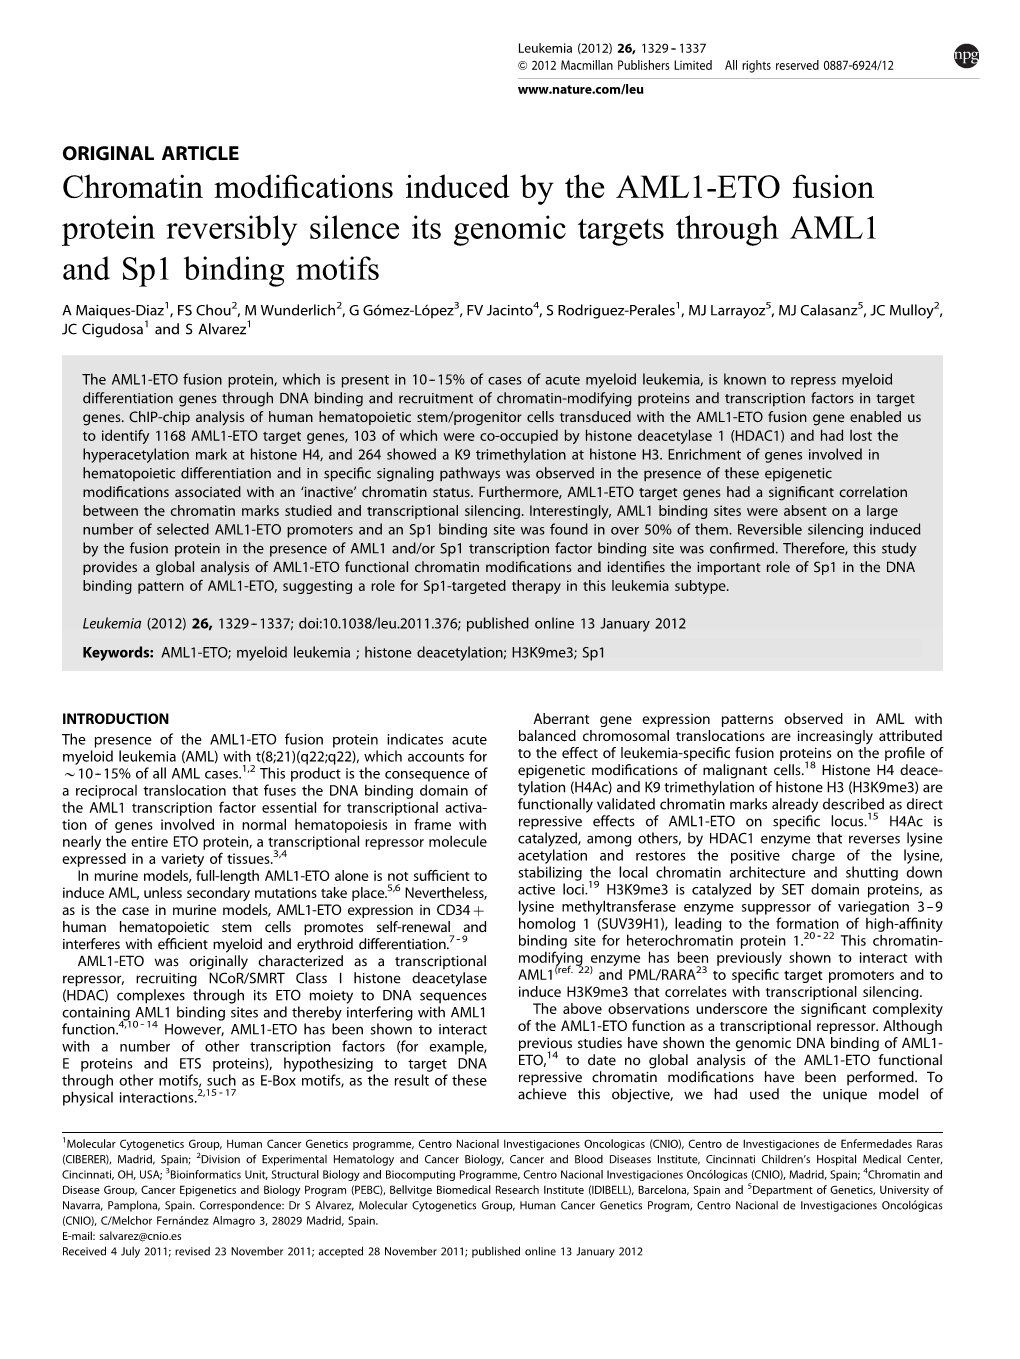 Chromatin Modifications Induced by the AML1-ETO Fusion Protein